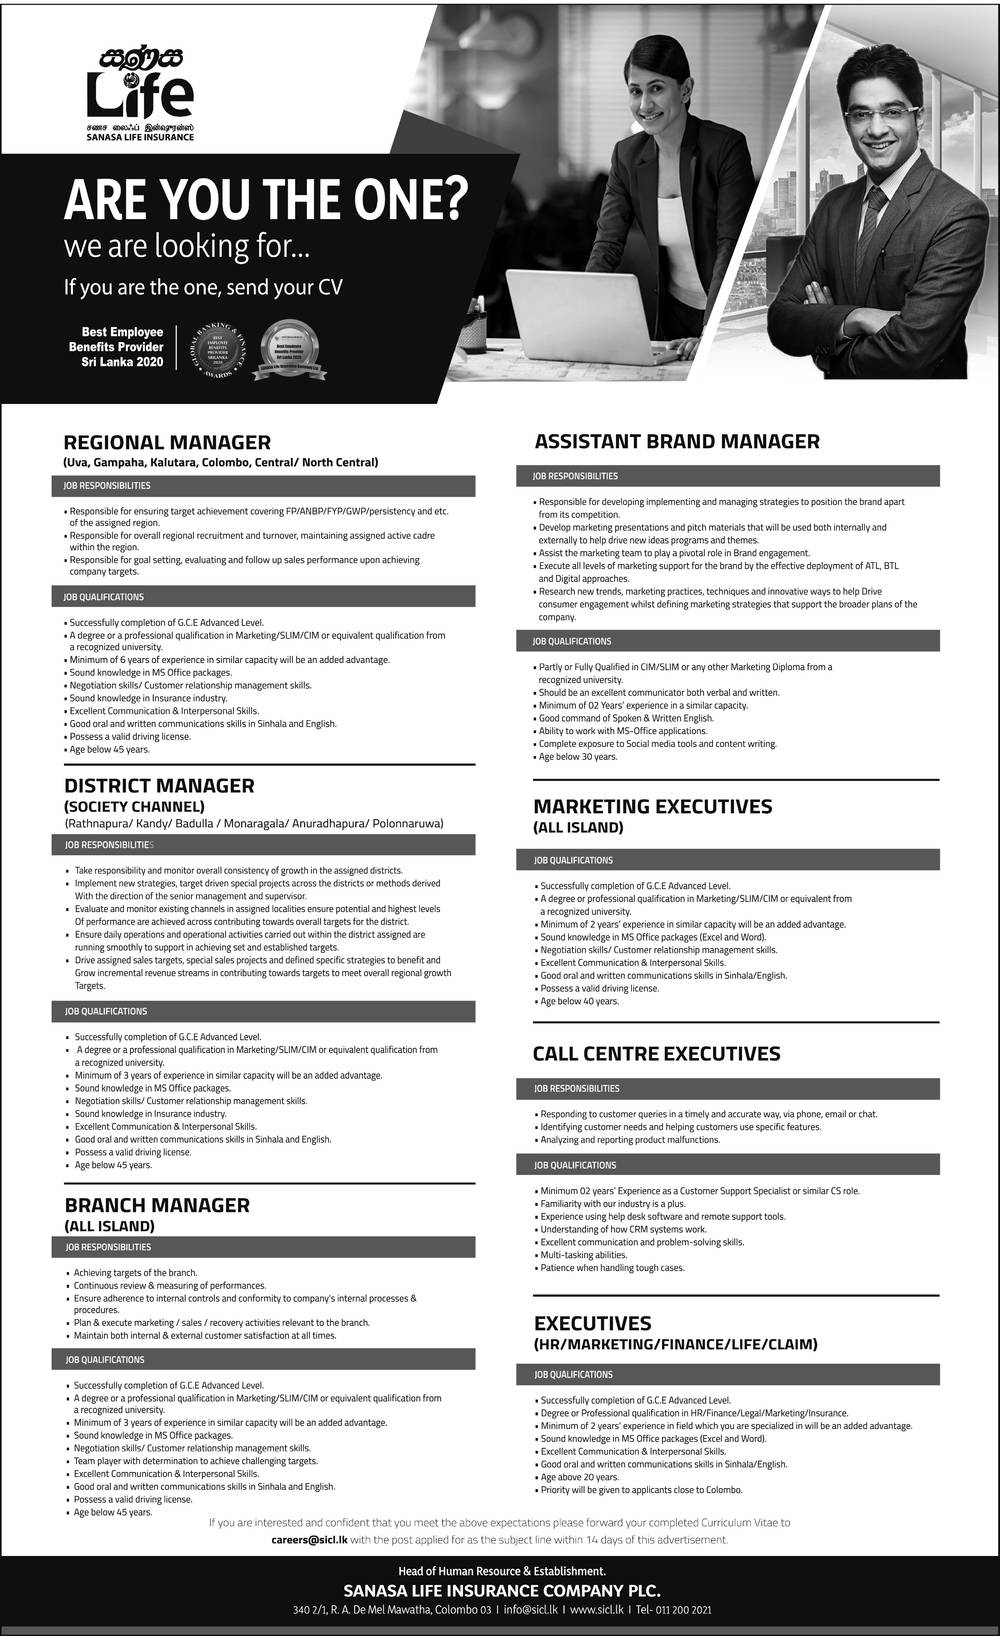 Reginal Manager, District Manager, Branch manager, Assistant Branch Manager, Marketing Executives, Call Centre Executive, Executive